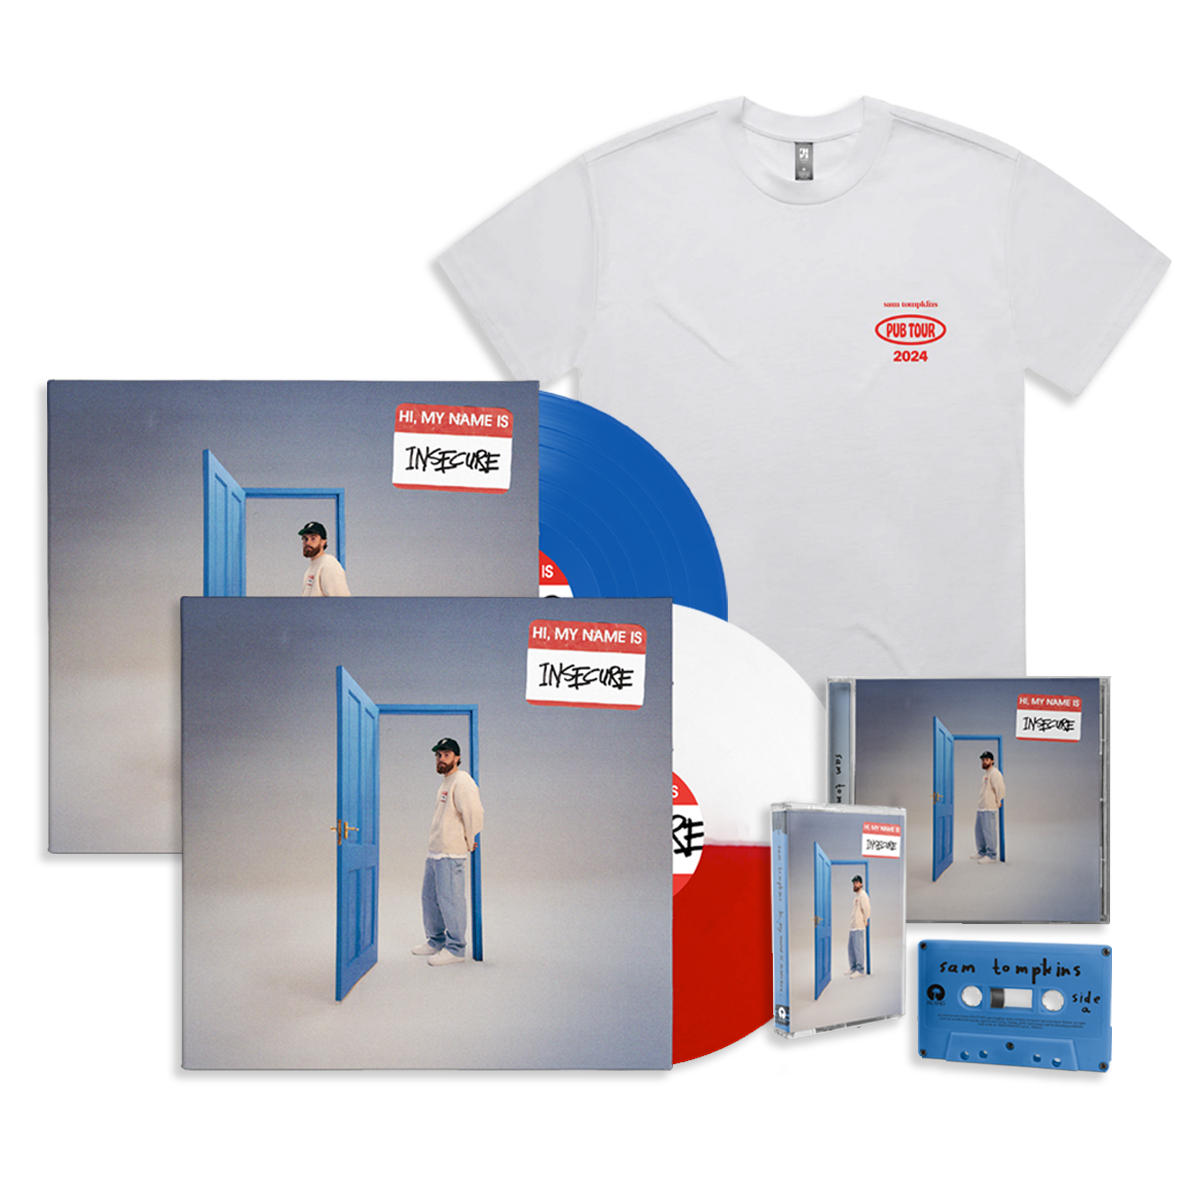 hi, my name is insecure: Music Bundle, Pub Tour T-Shirt + Signed Beer Mat